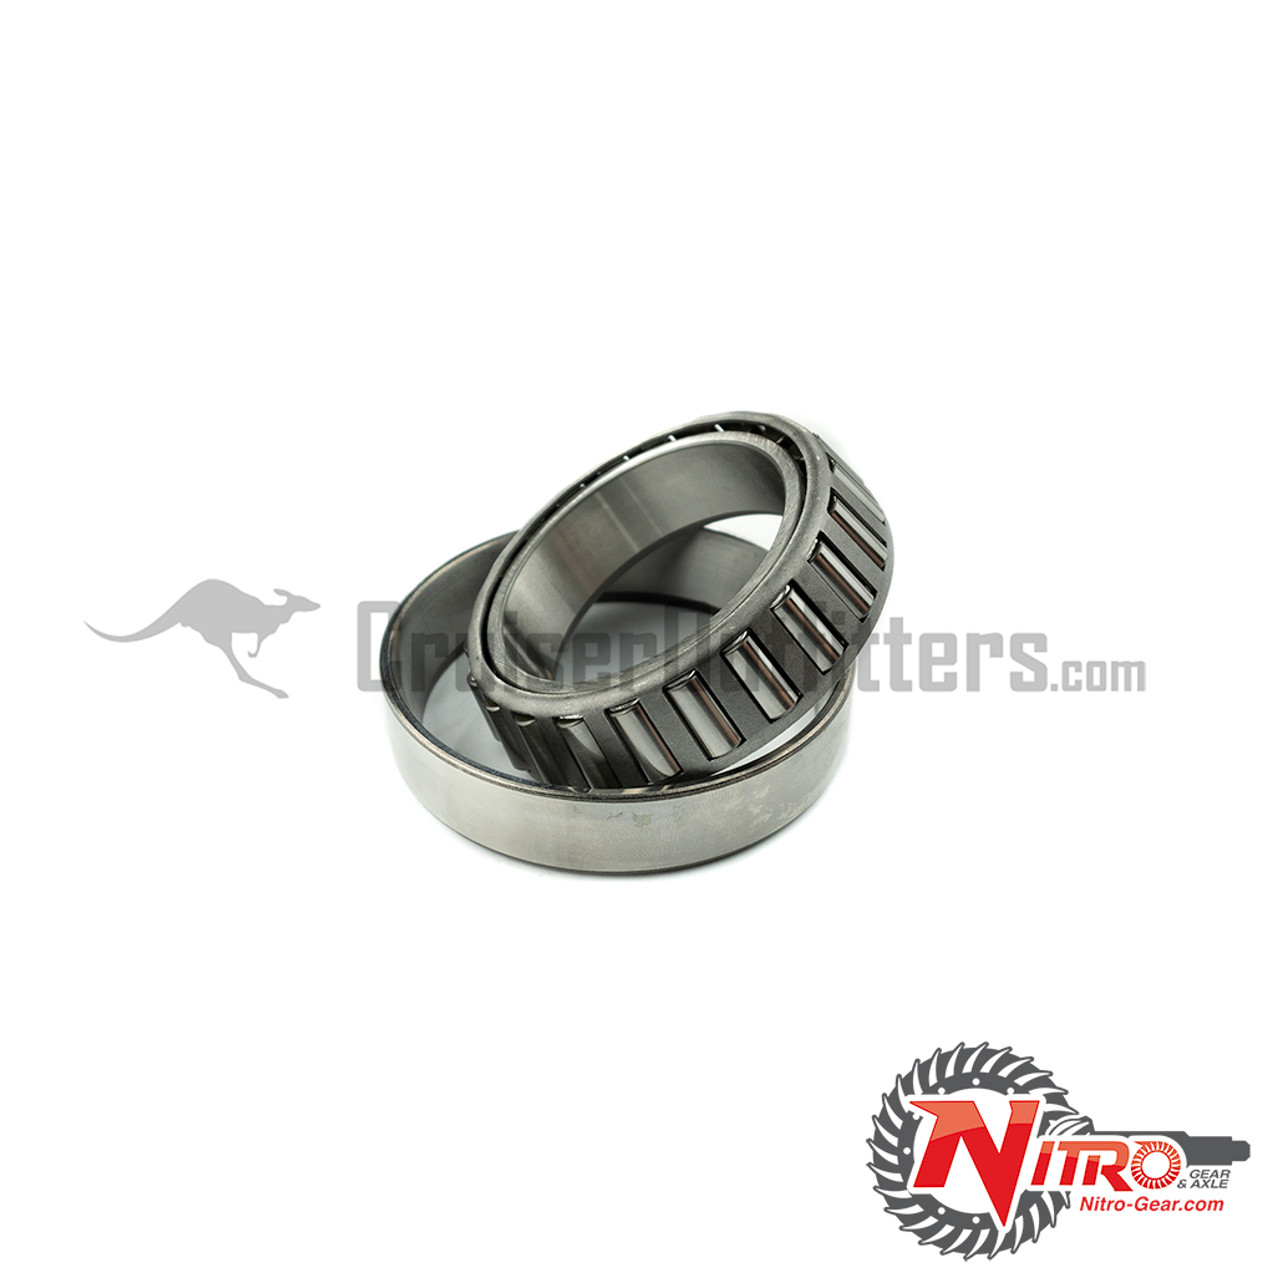 Ring and Pinion Install / Differential Overhaul Kit - Fits URJ200 Clamshell Front IFS Differential (IKTOYLC200F)